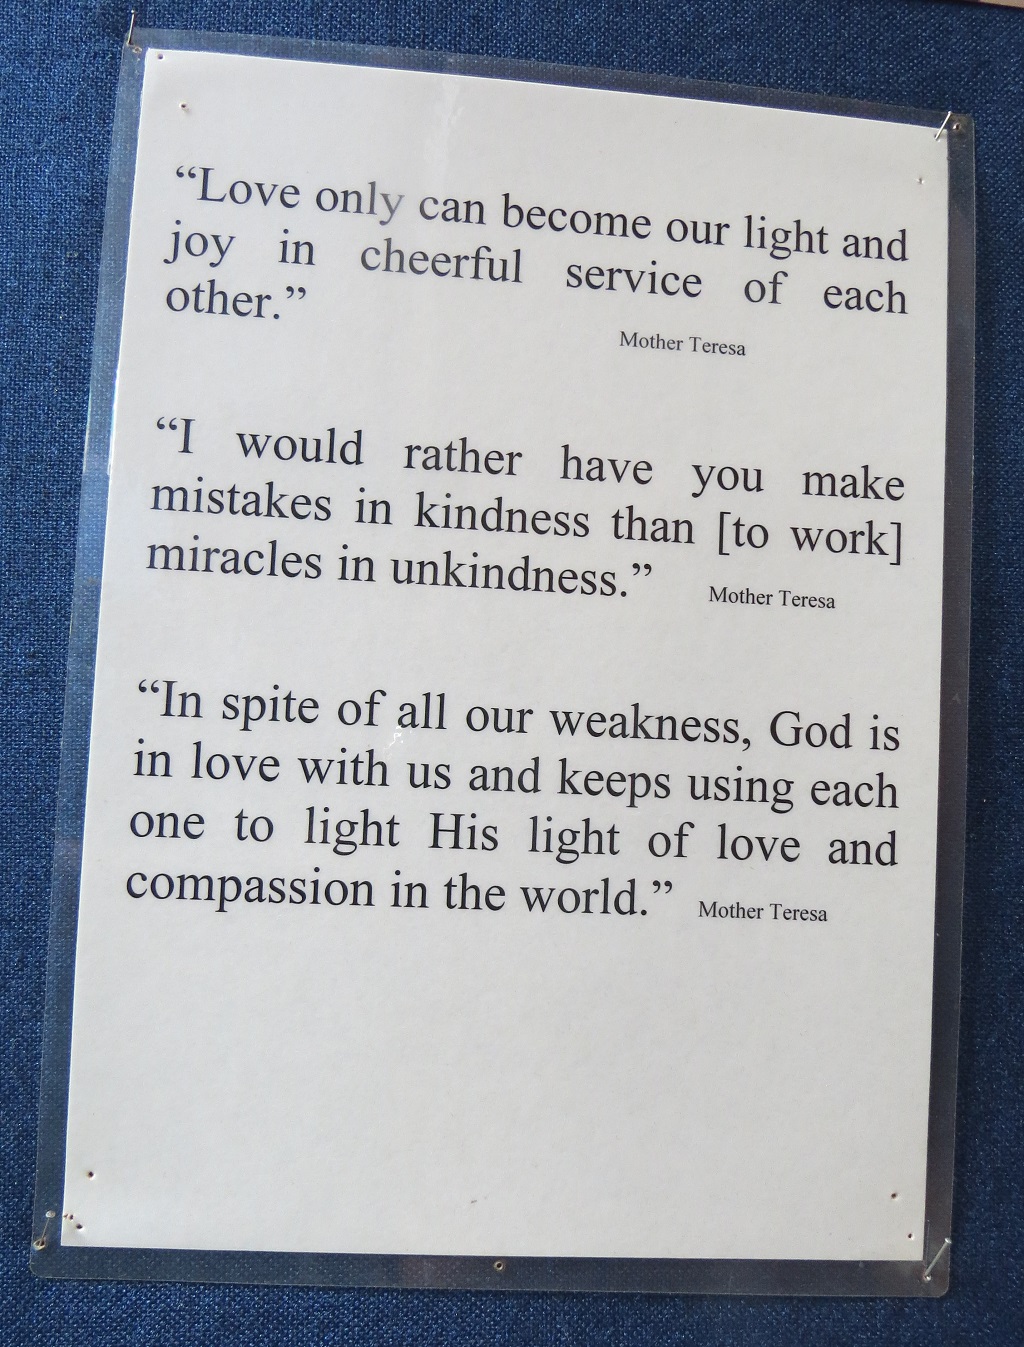 Quotes by Mother Teresa (Part II)